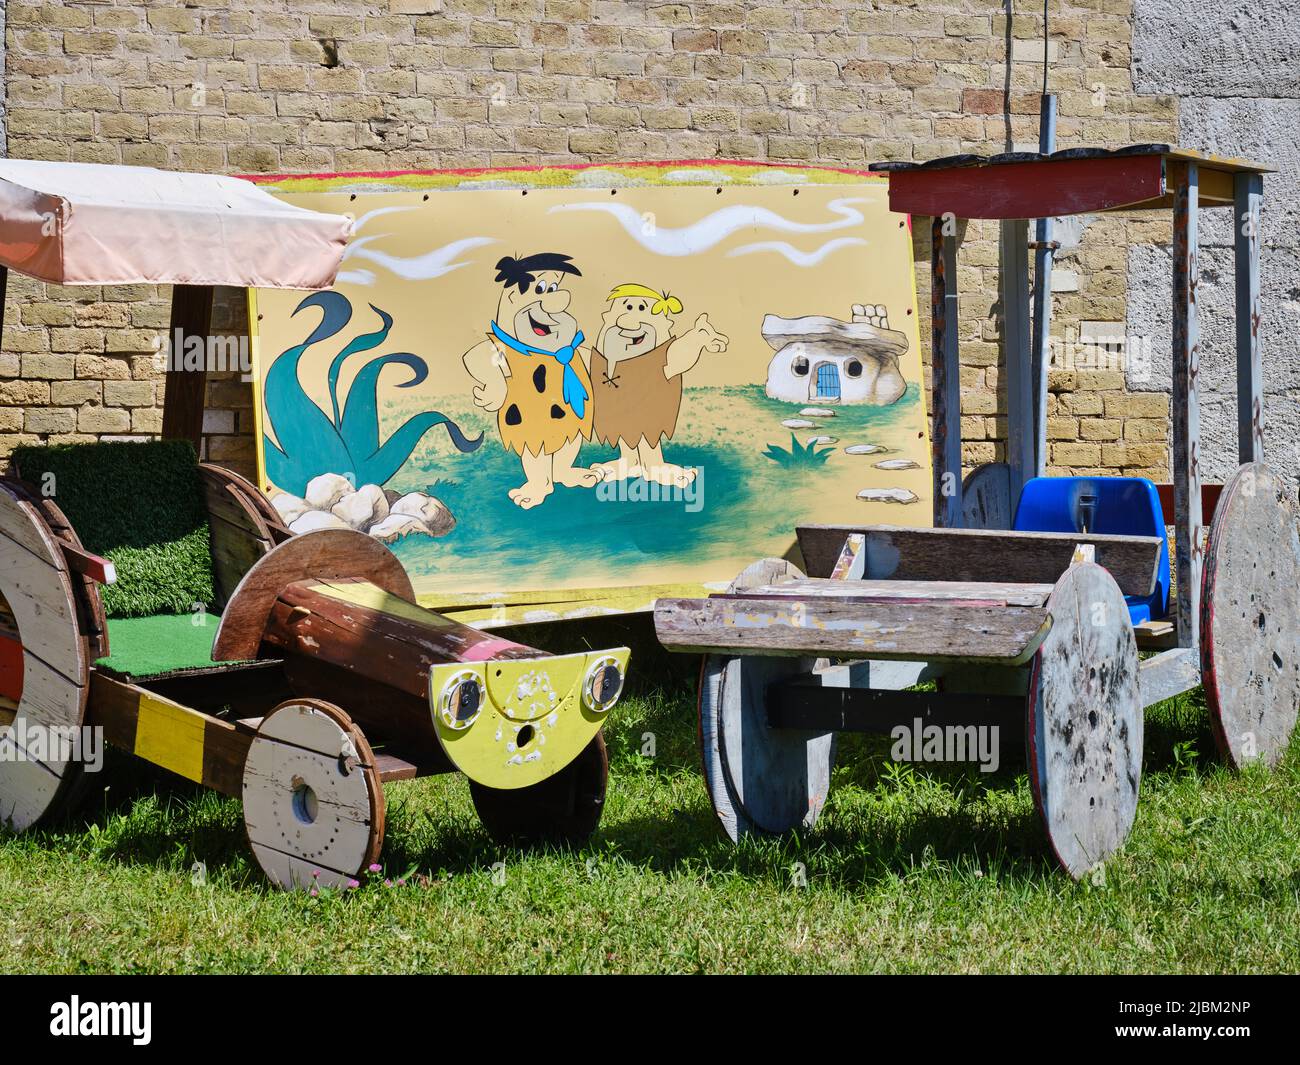 Flintstones wooden cars and drawing by a brick wall outside Stock Photo